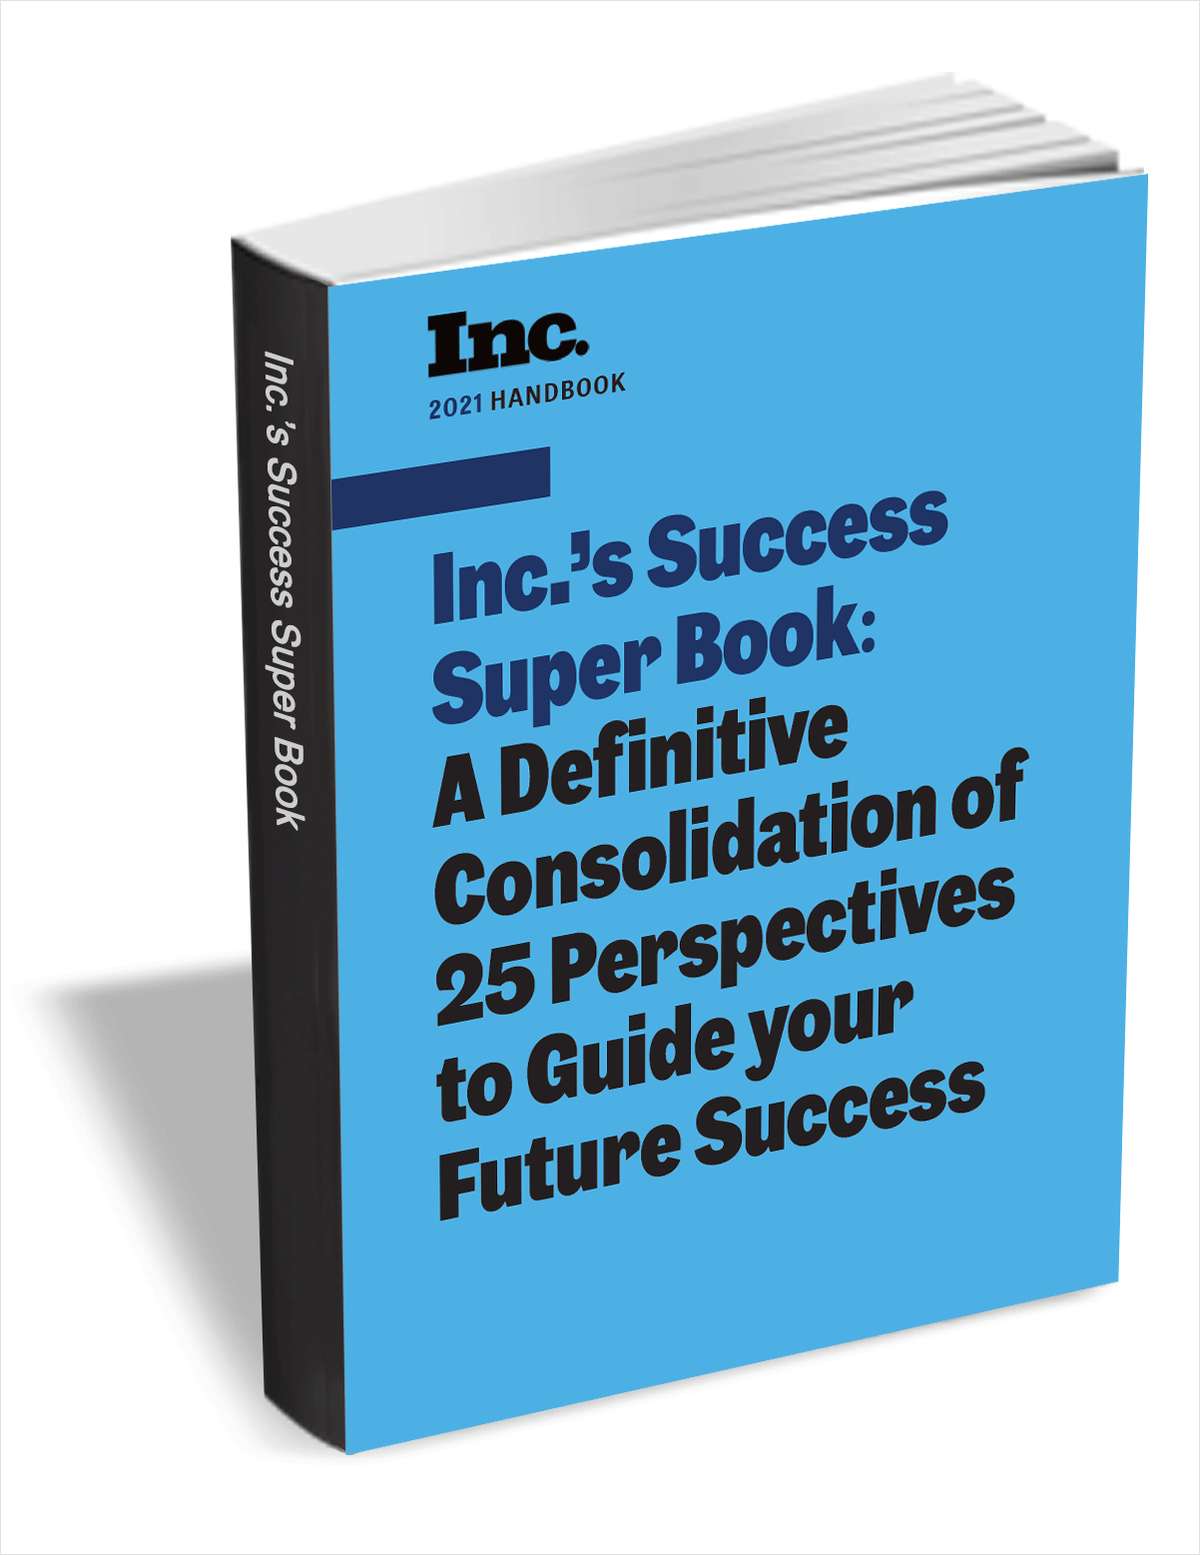 Inc.'s Success Super Book: A Definitive Consolidation of 25 Perspectives to Guide your Future Success